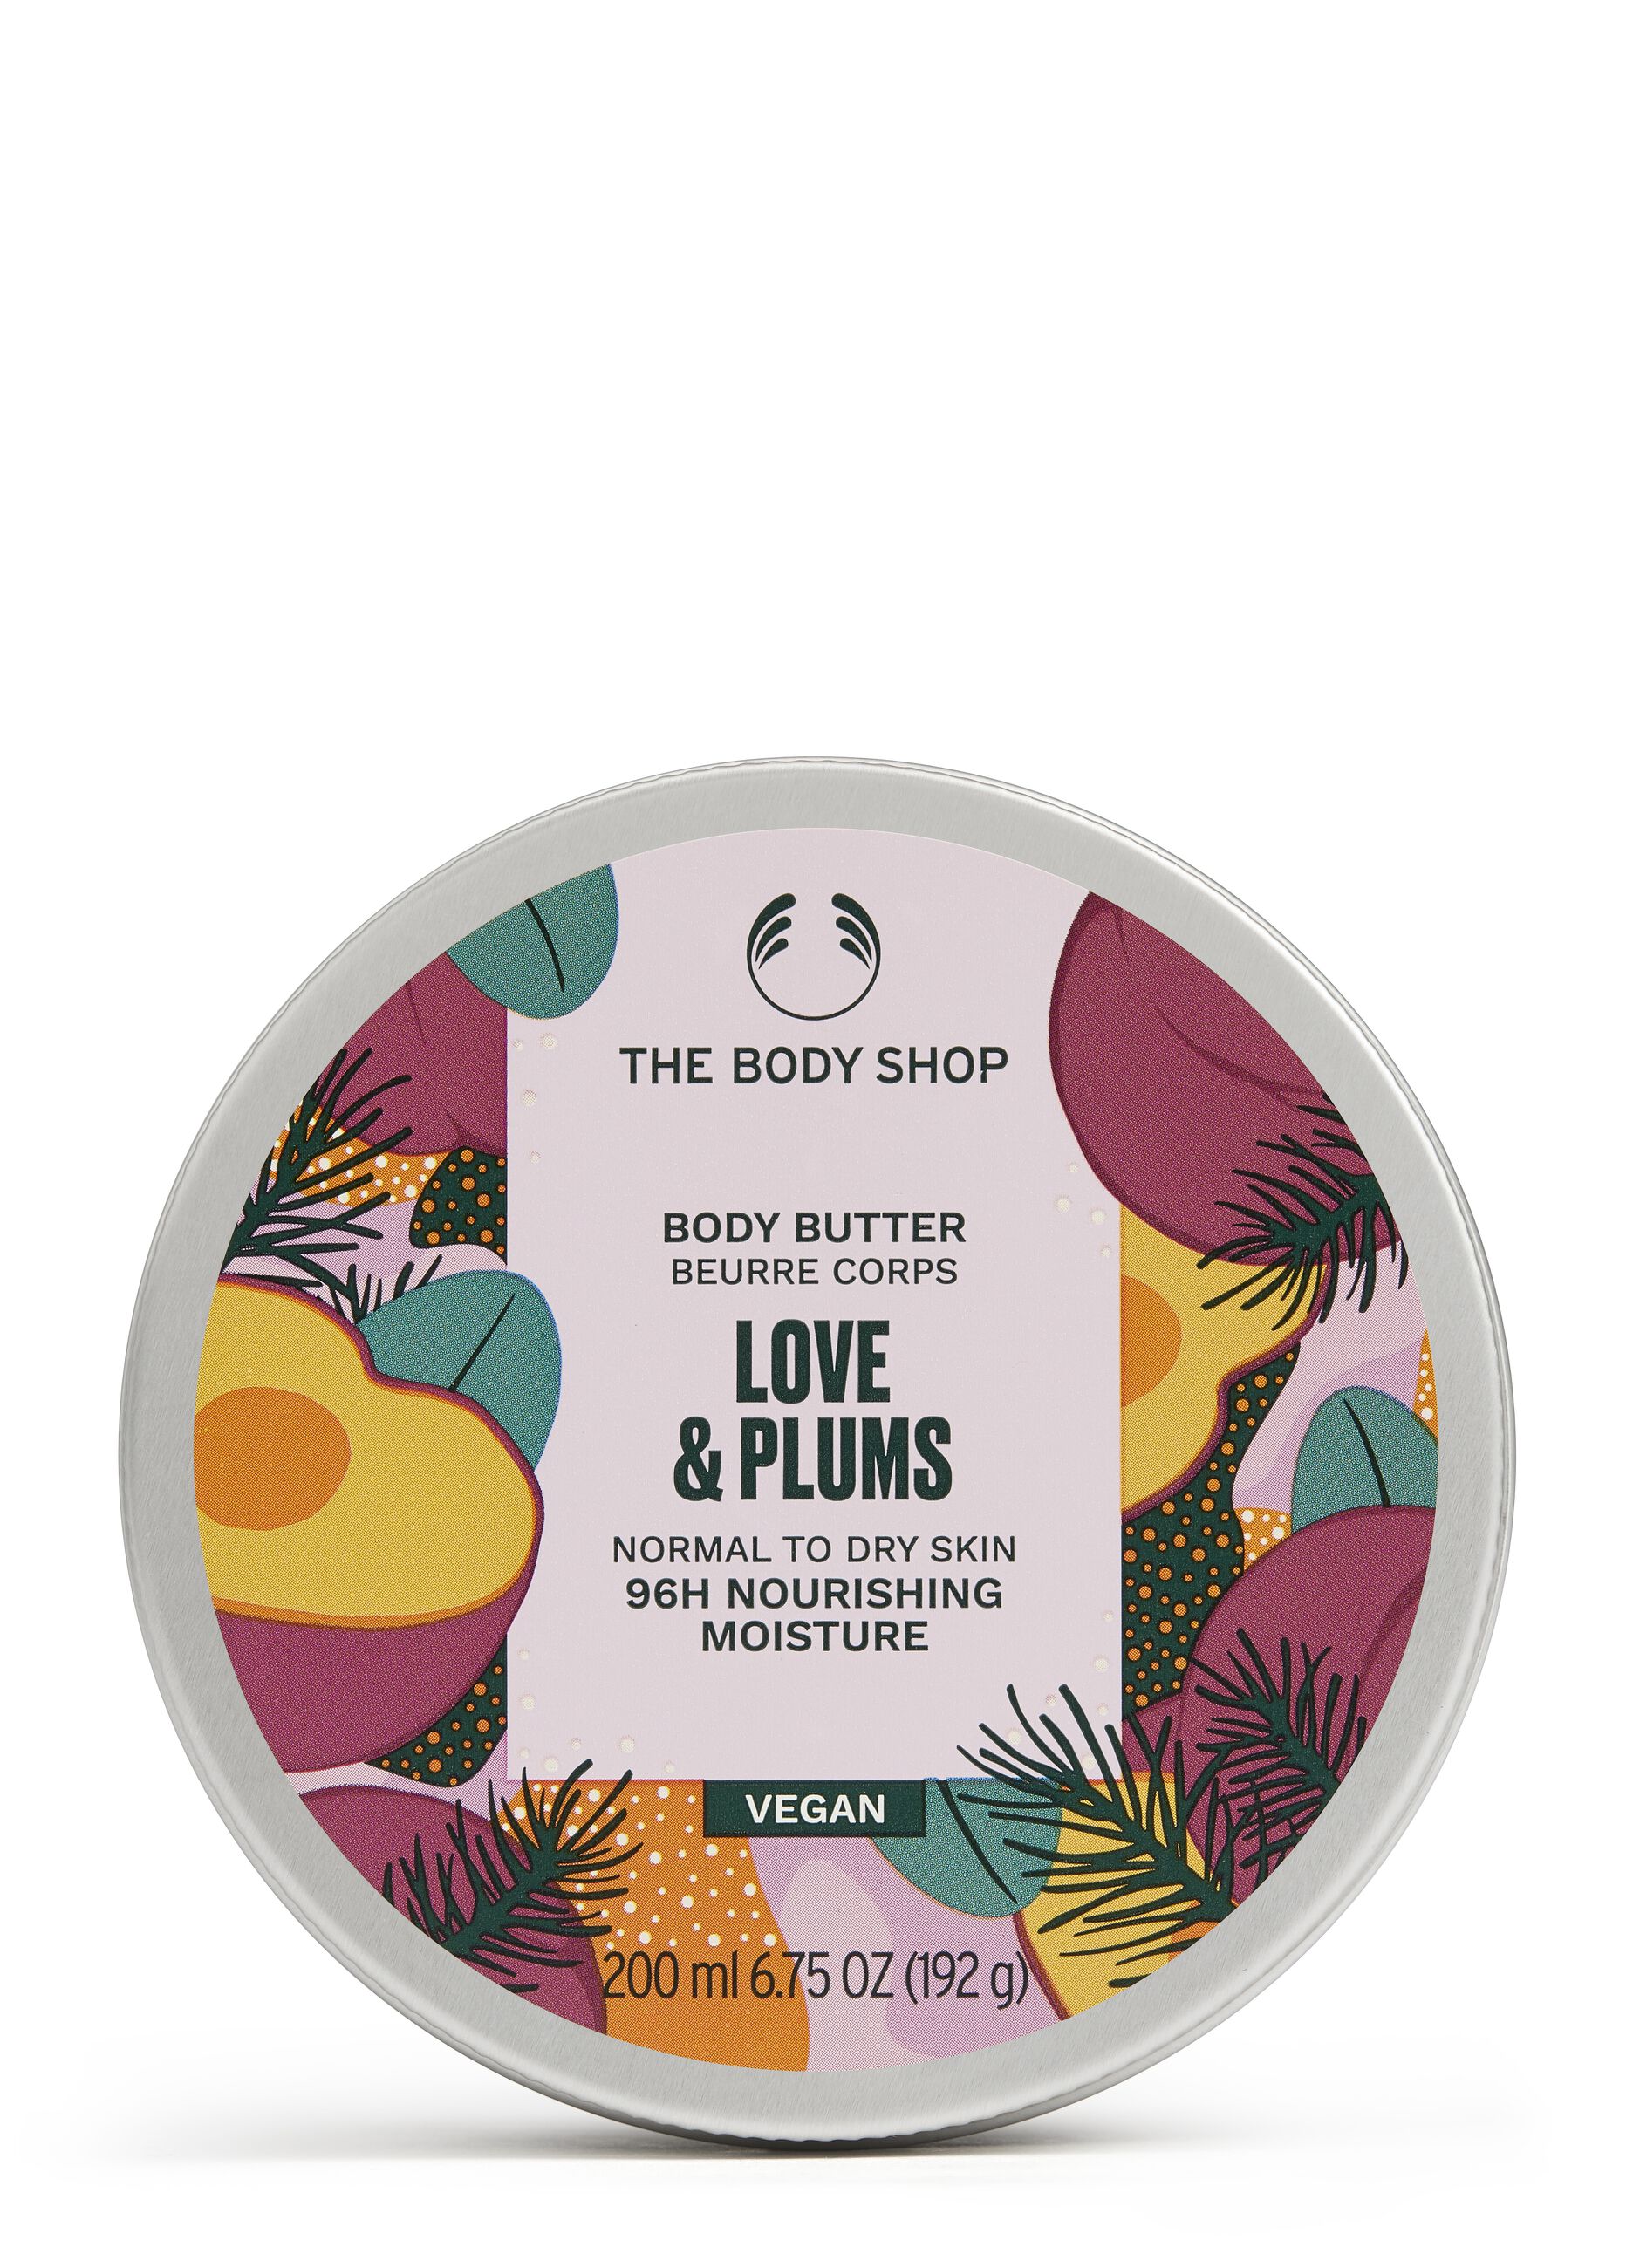 The Body Shop Love & Plums body butter 200ml